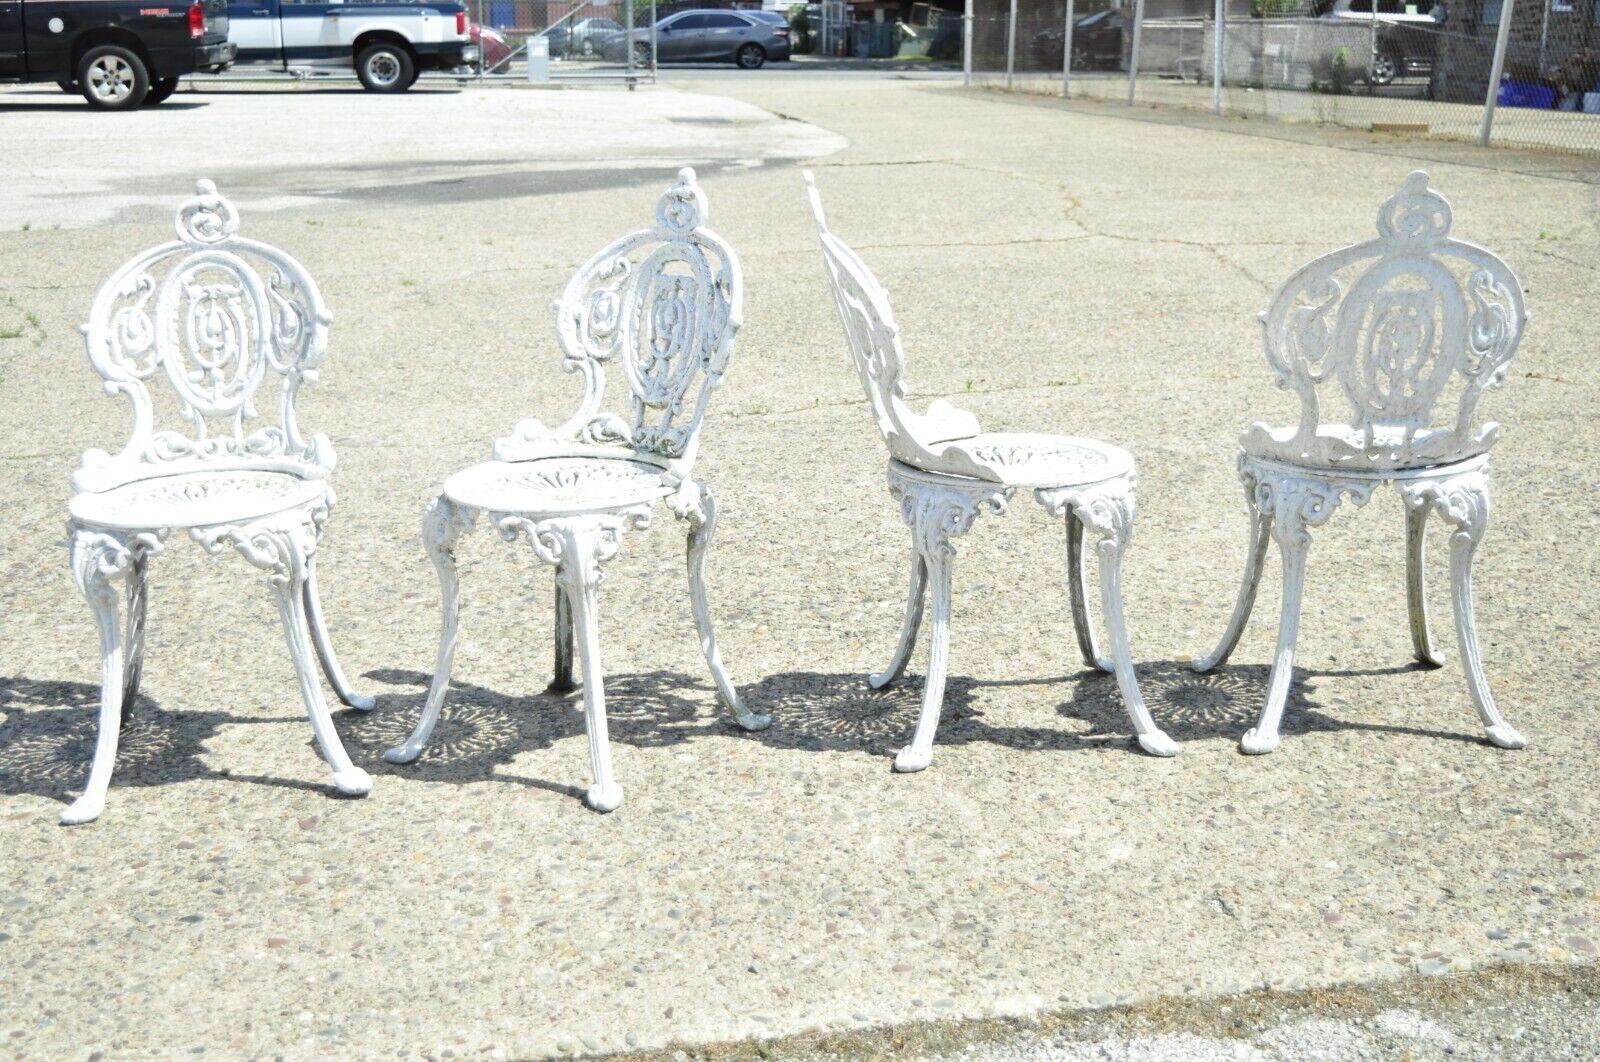 Victorian style cast aluminum ornate outdoor garden chairs - set of 4. Item features (4) side chairs, nice small size, ornate design, great style and form. Circa mid 20th century. Measurements: 32